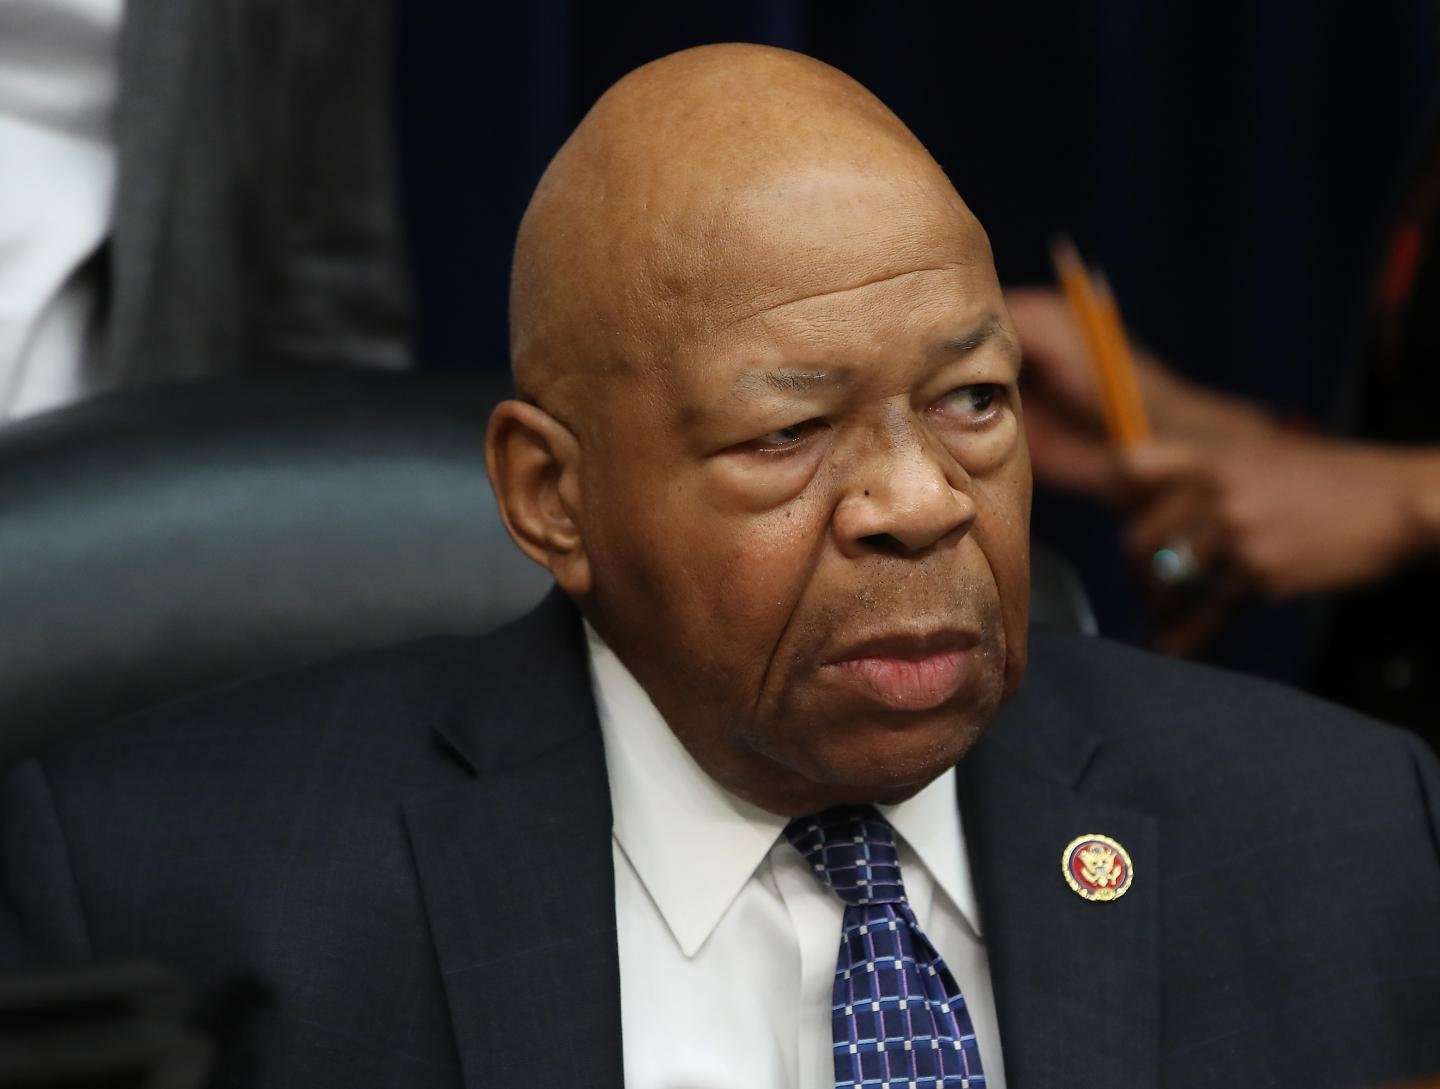 image for Elijah Cummings Says Donald Trump Involved in 'Unprecedented Level of Stonewalling, Delay and Obstruction' in House Investigations